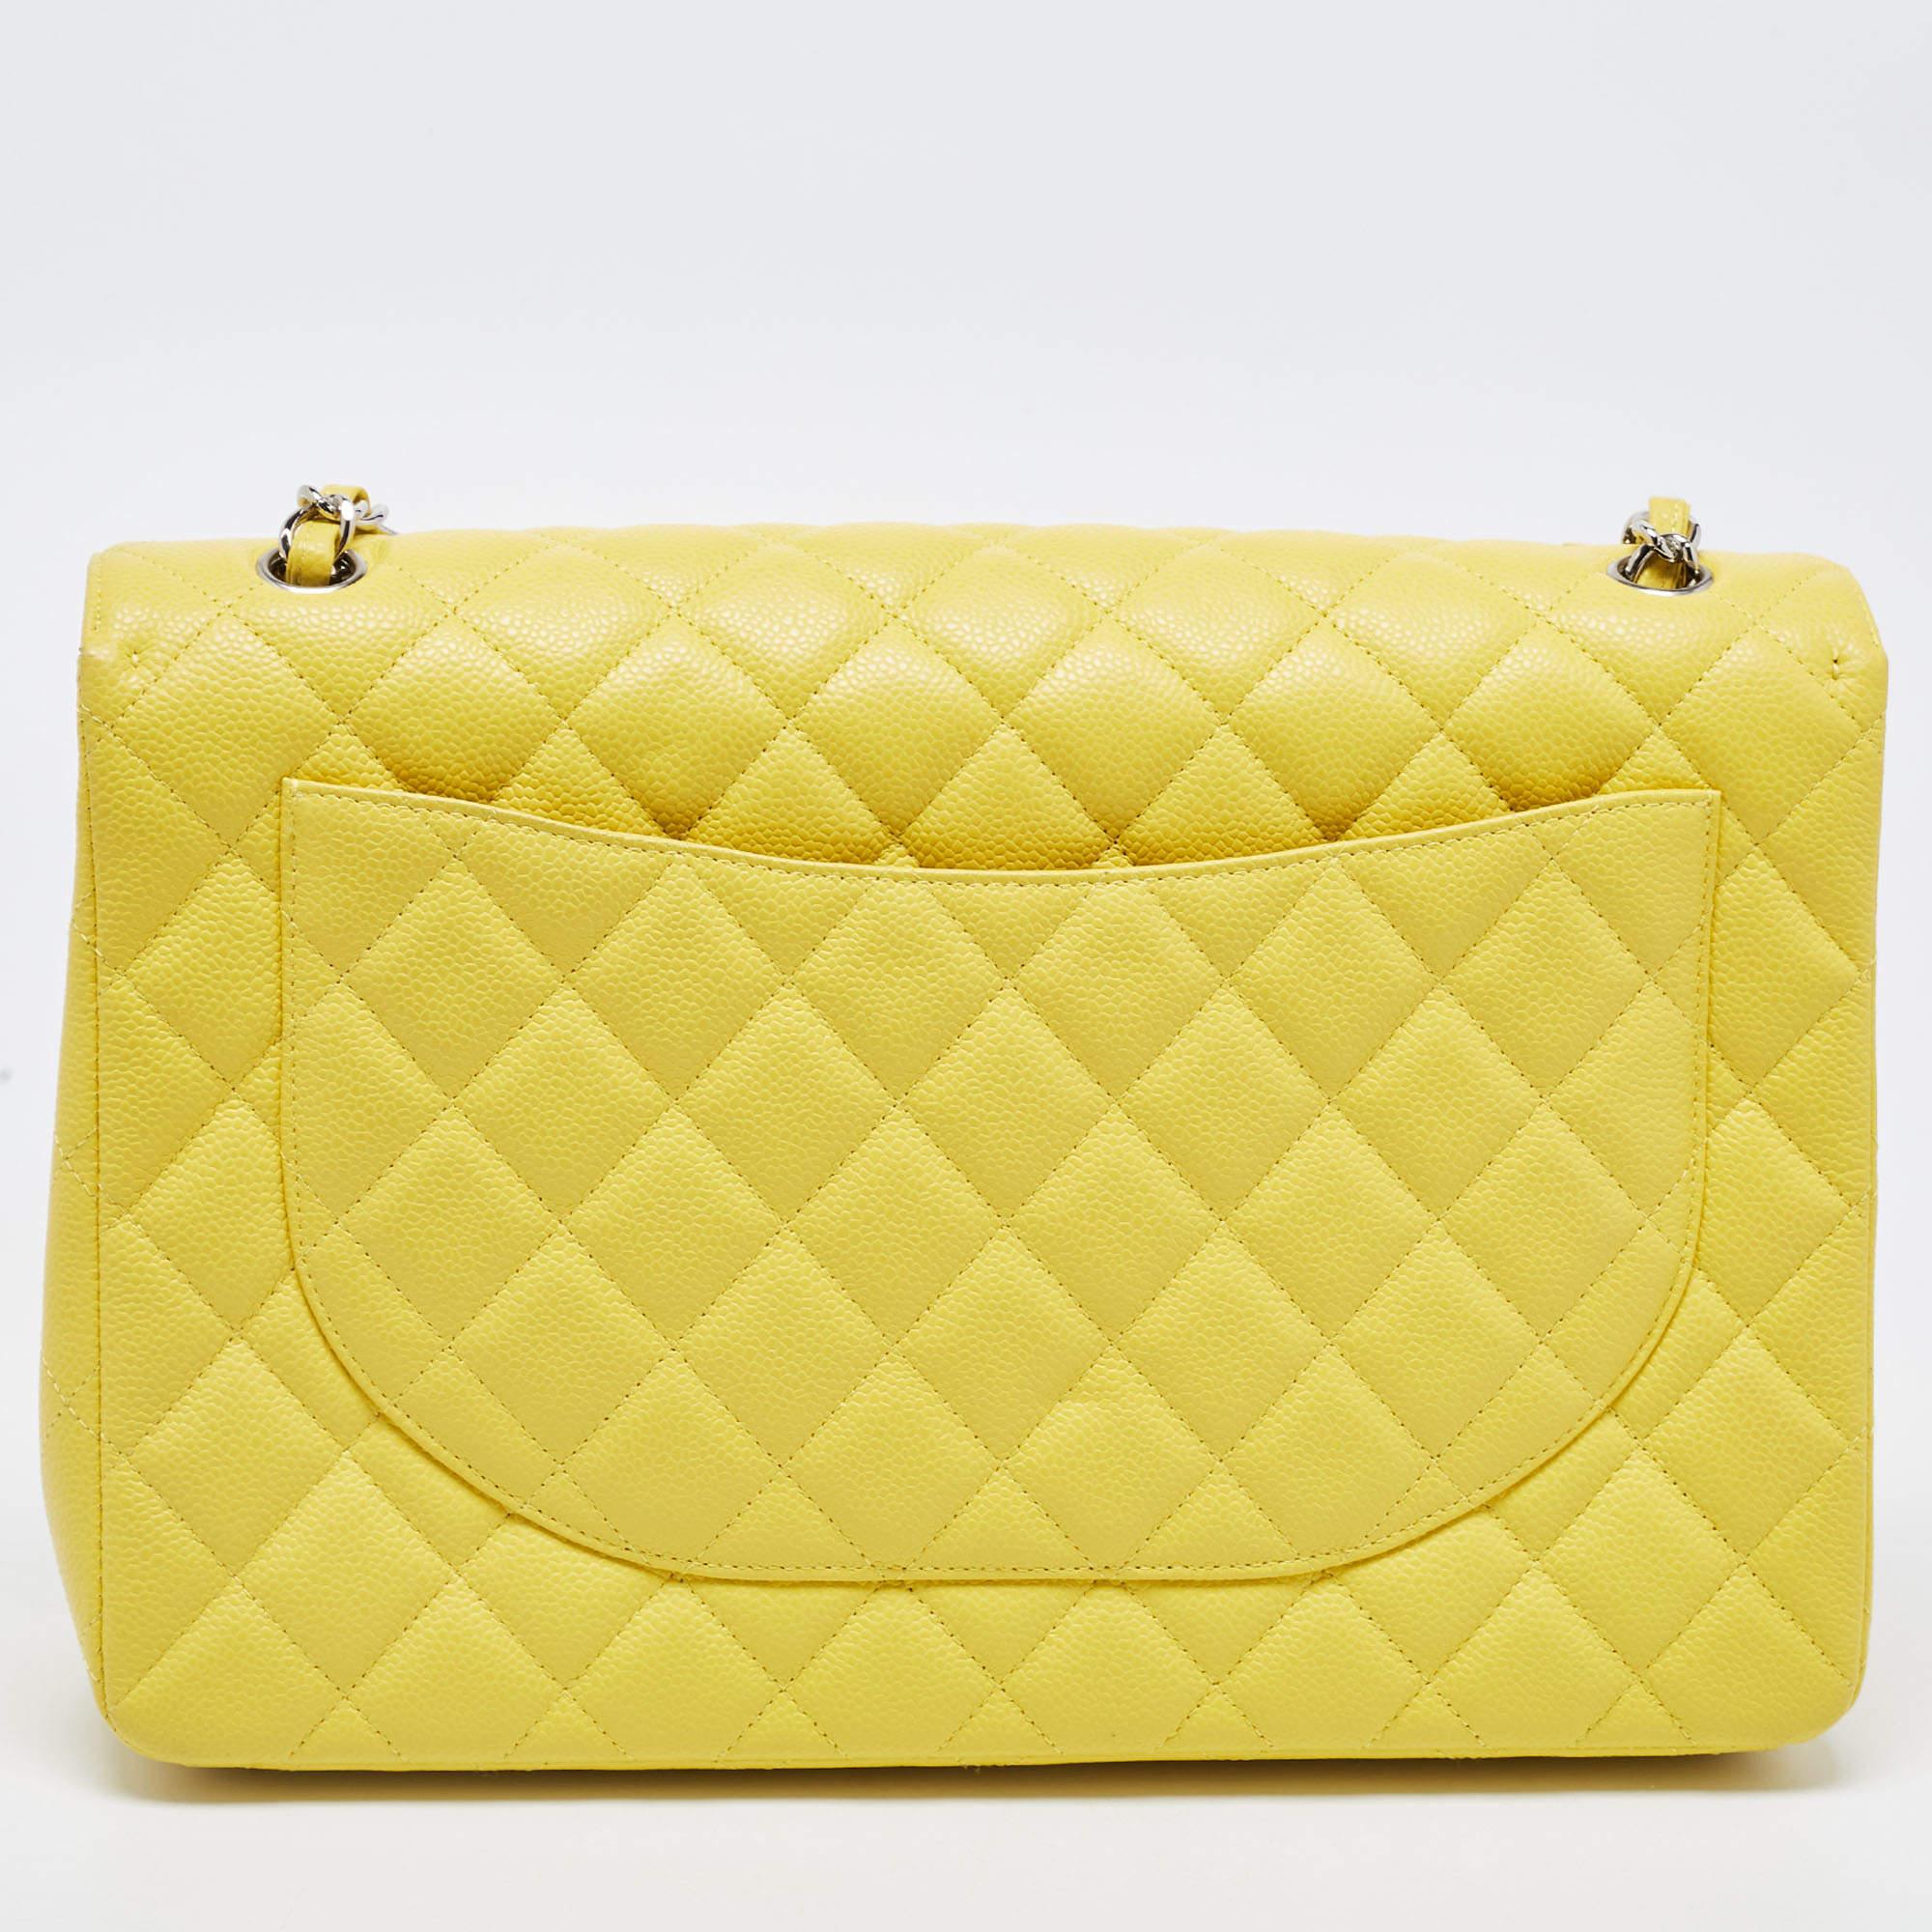 Women's Chanel Yellow Quilted Caviar Leather Maxi Classic Single Flap Bag